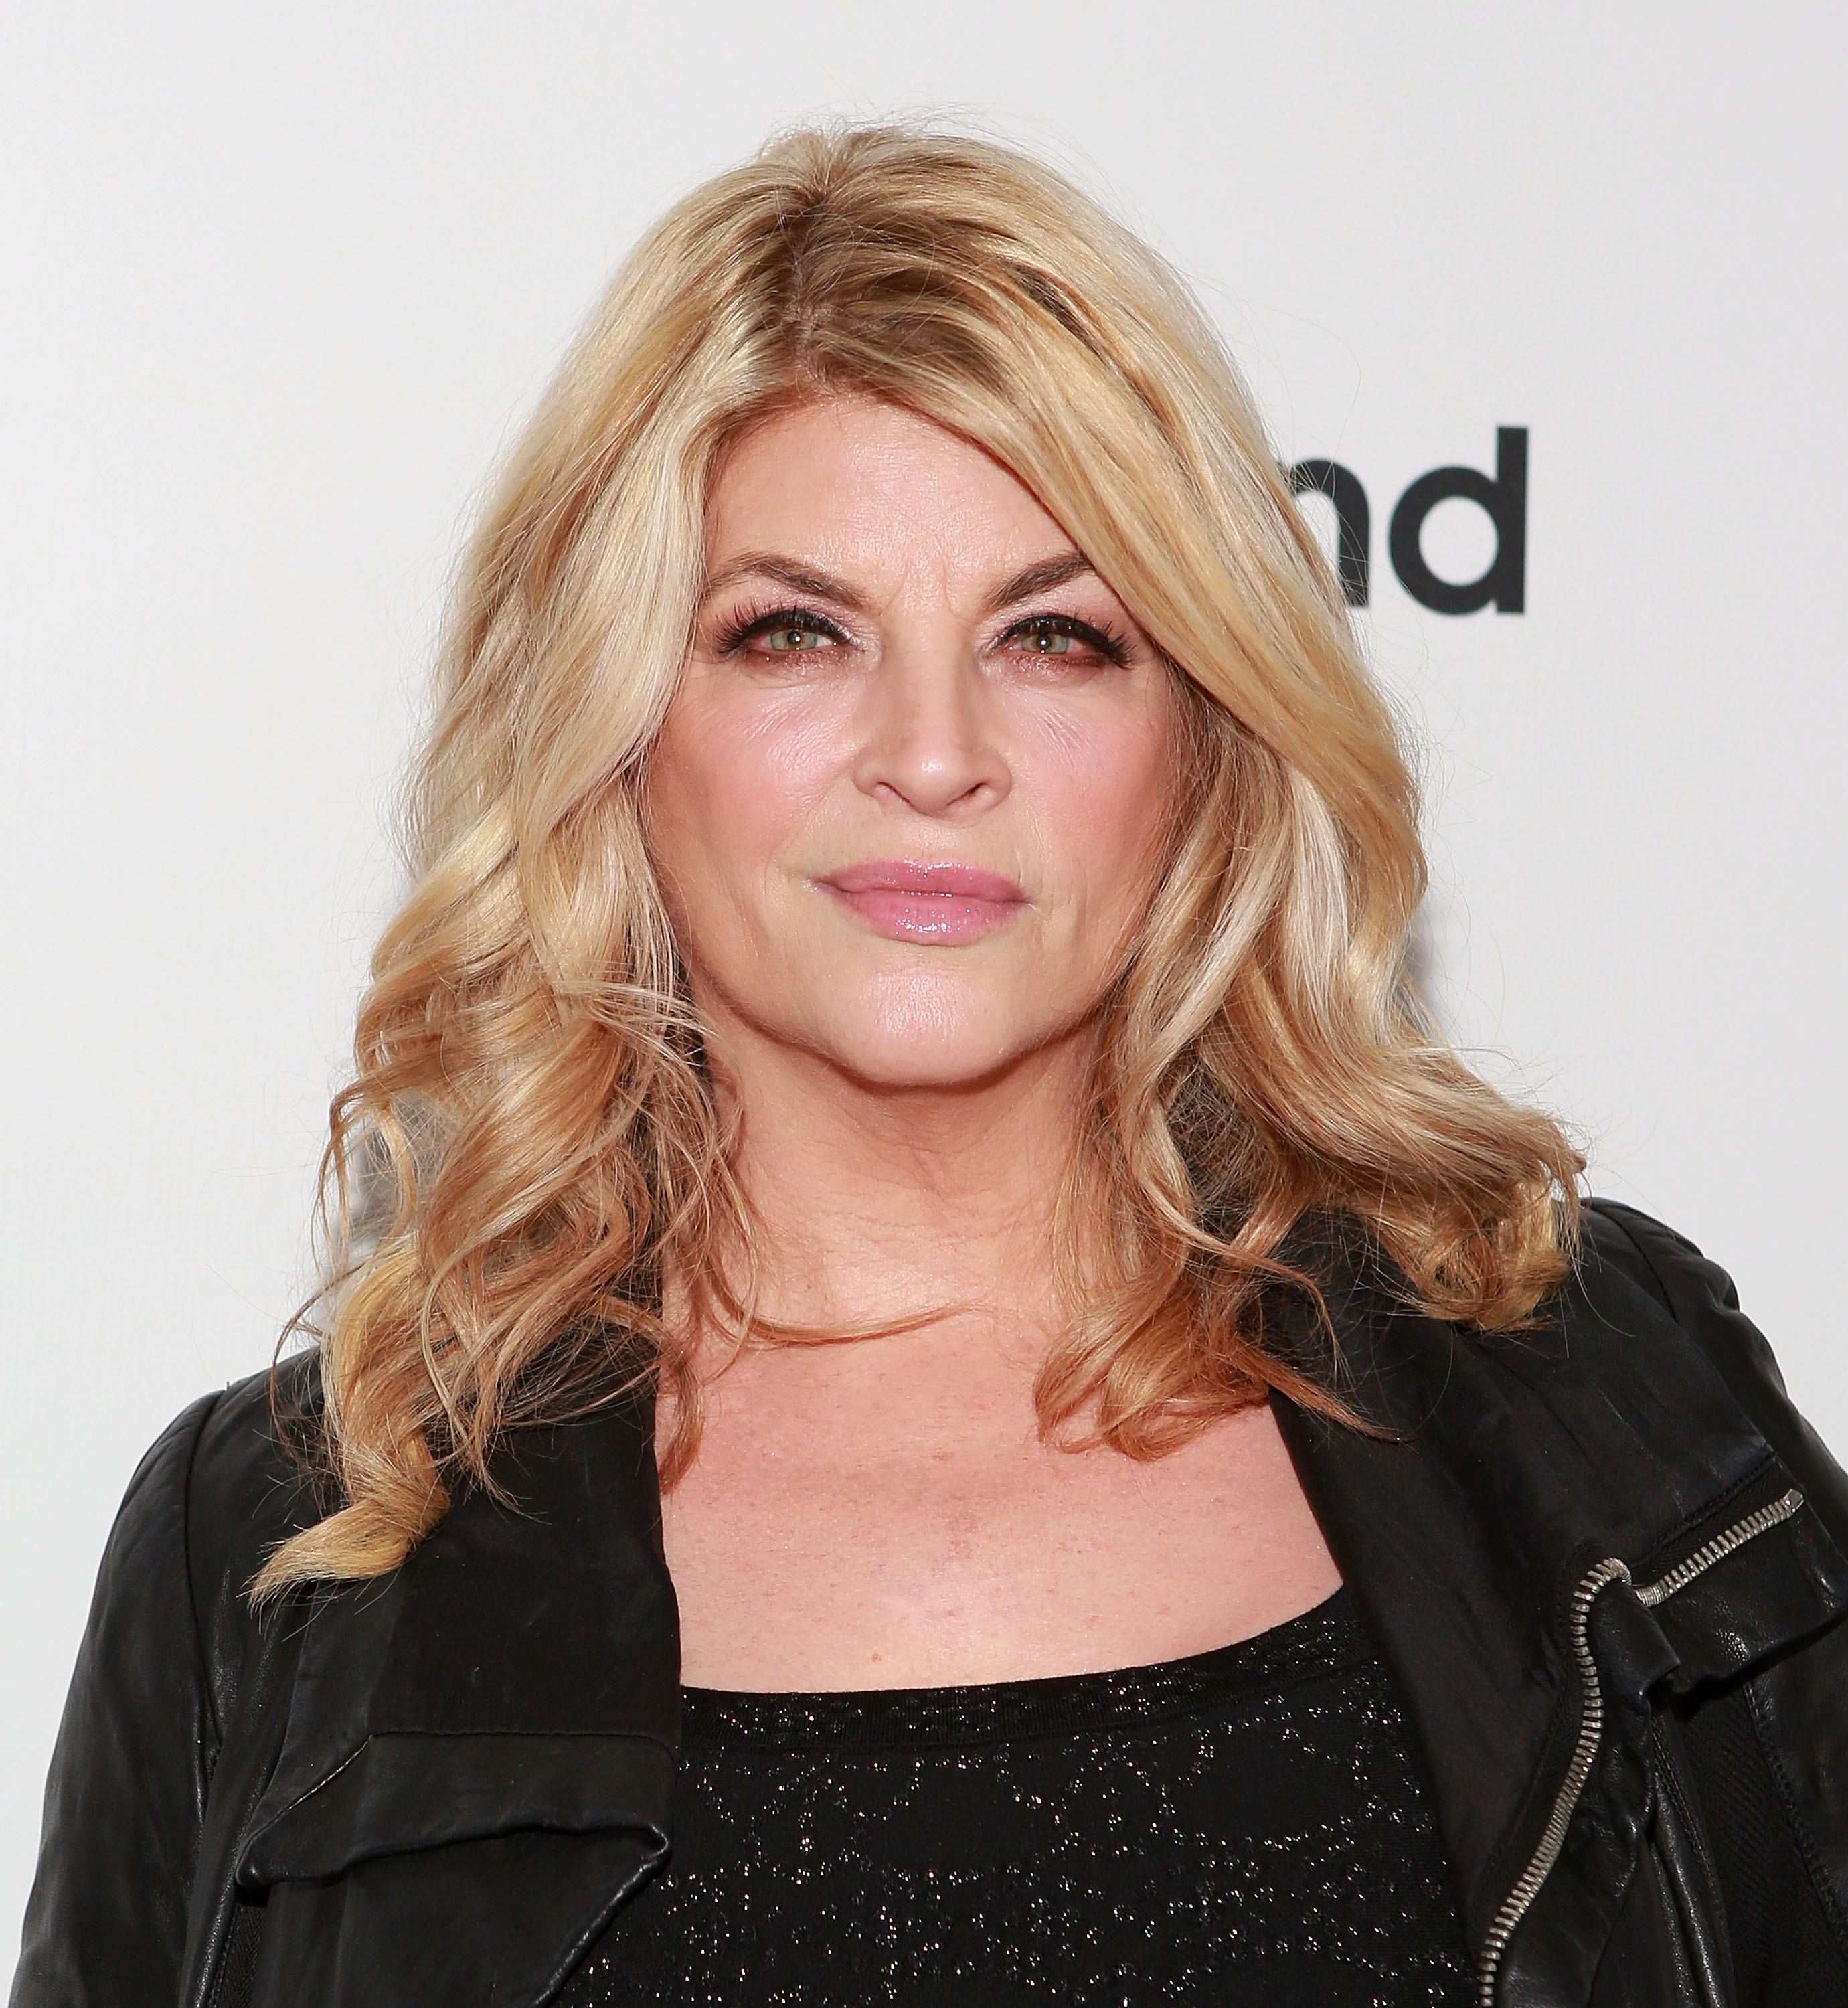 Kirstie Alley Dishes About Her 50 Pound Weight Loss Closer Weekly